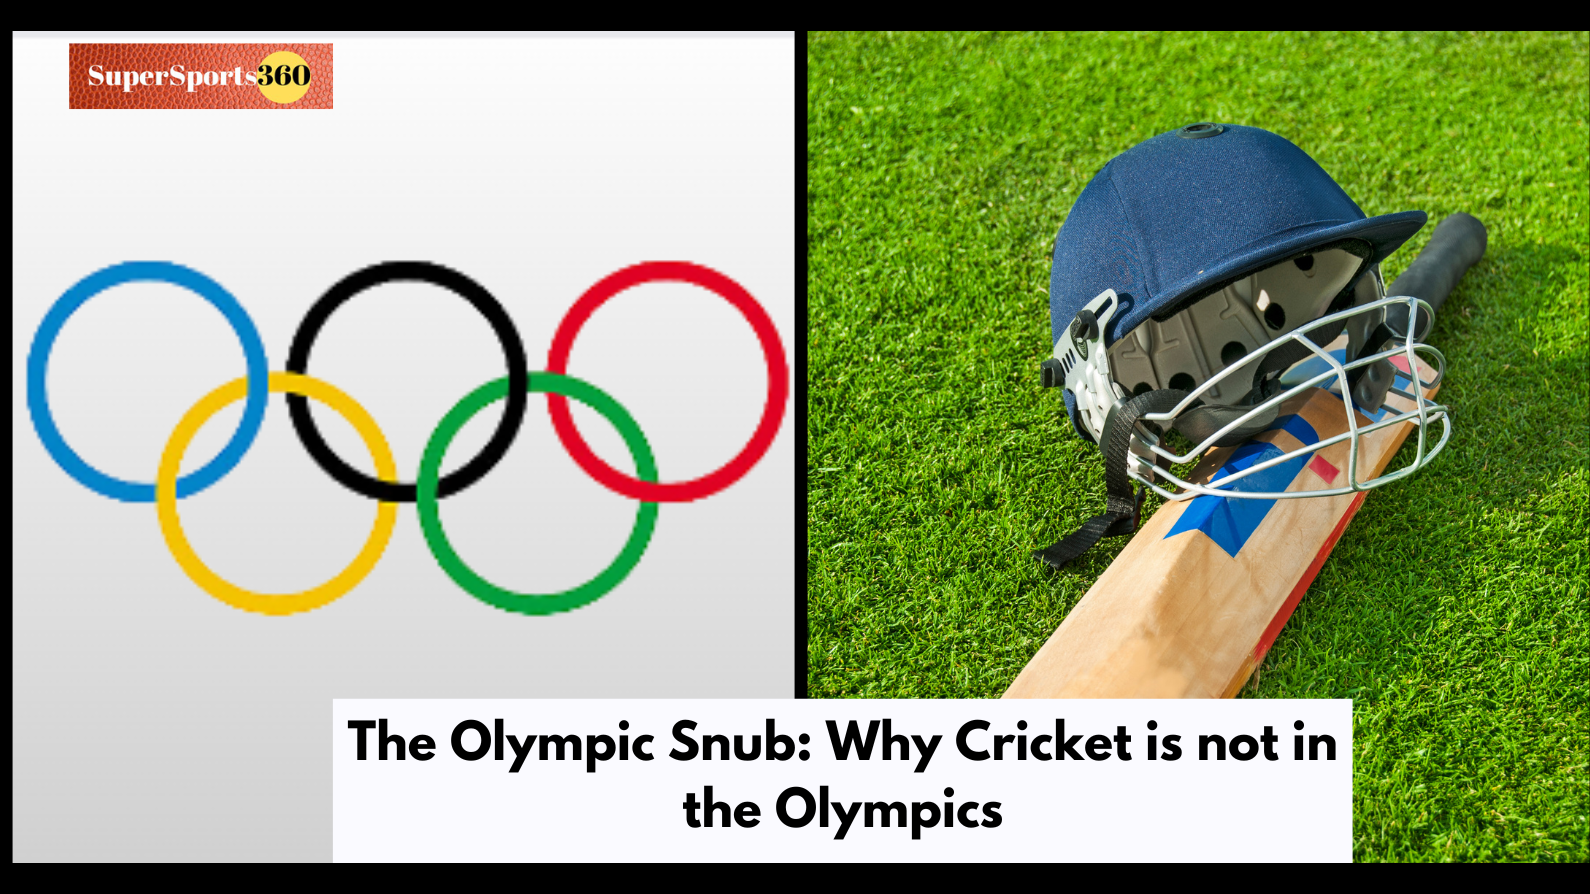 The Olympic Snub: Why Cricket is not in the Olympics